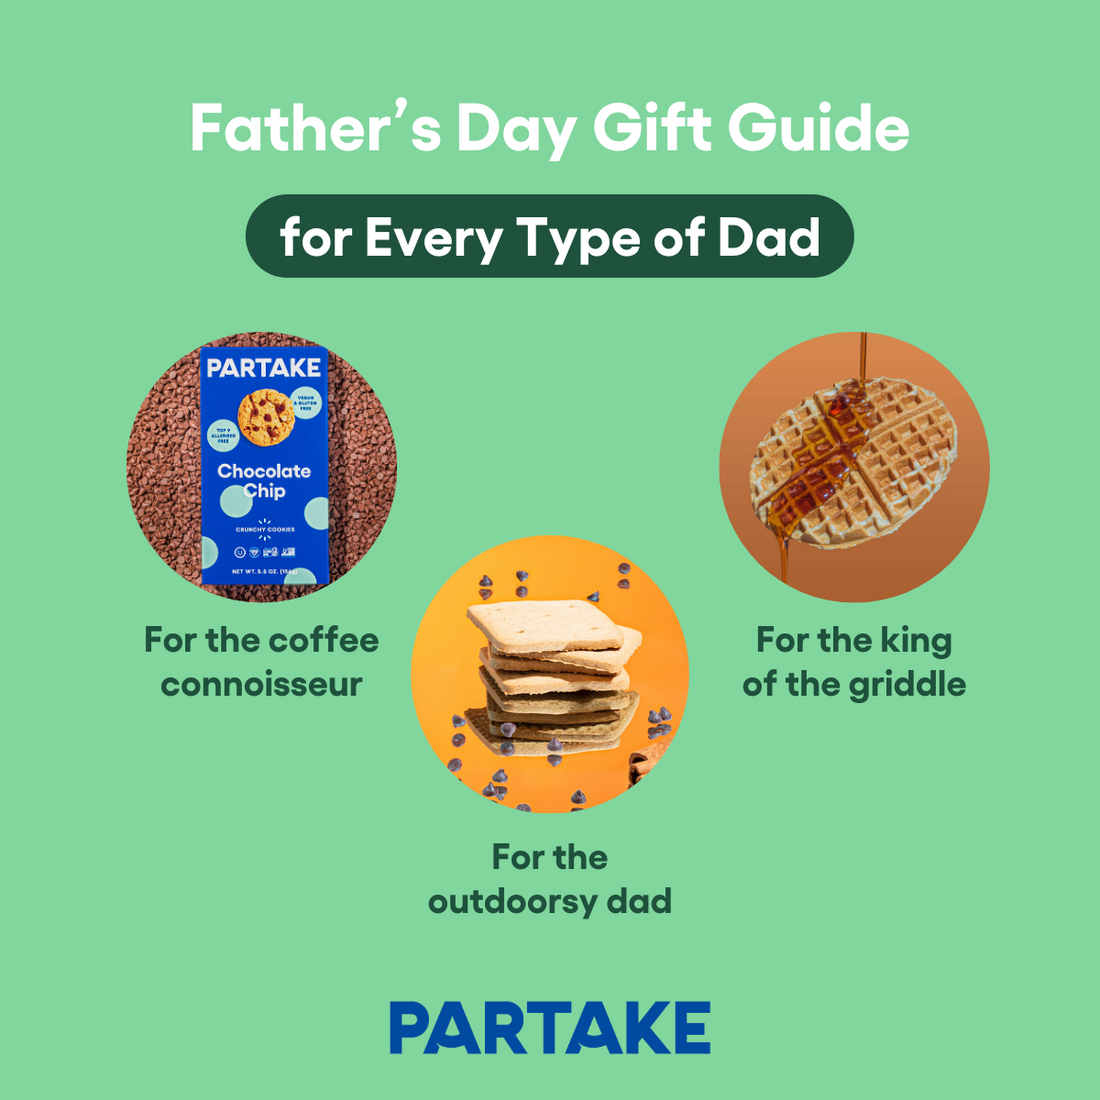 Father's Day Gift Guide for Every Type of Dad